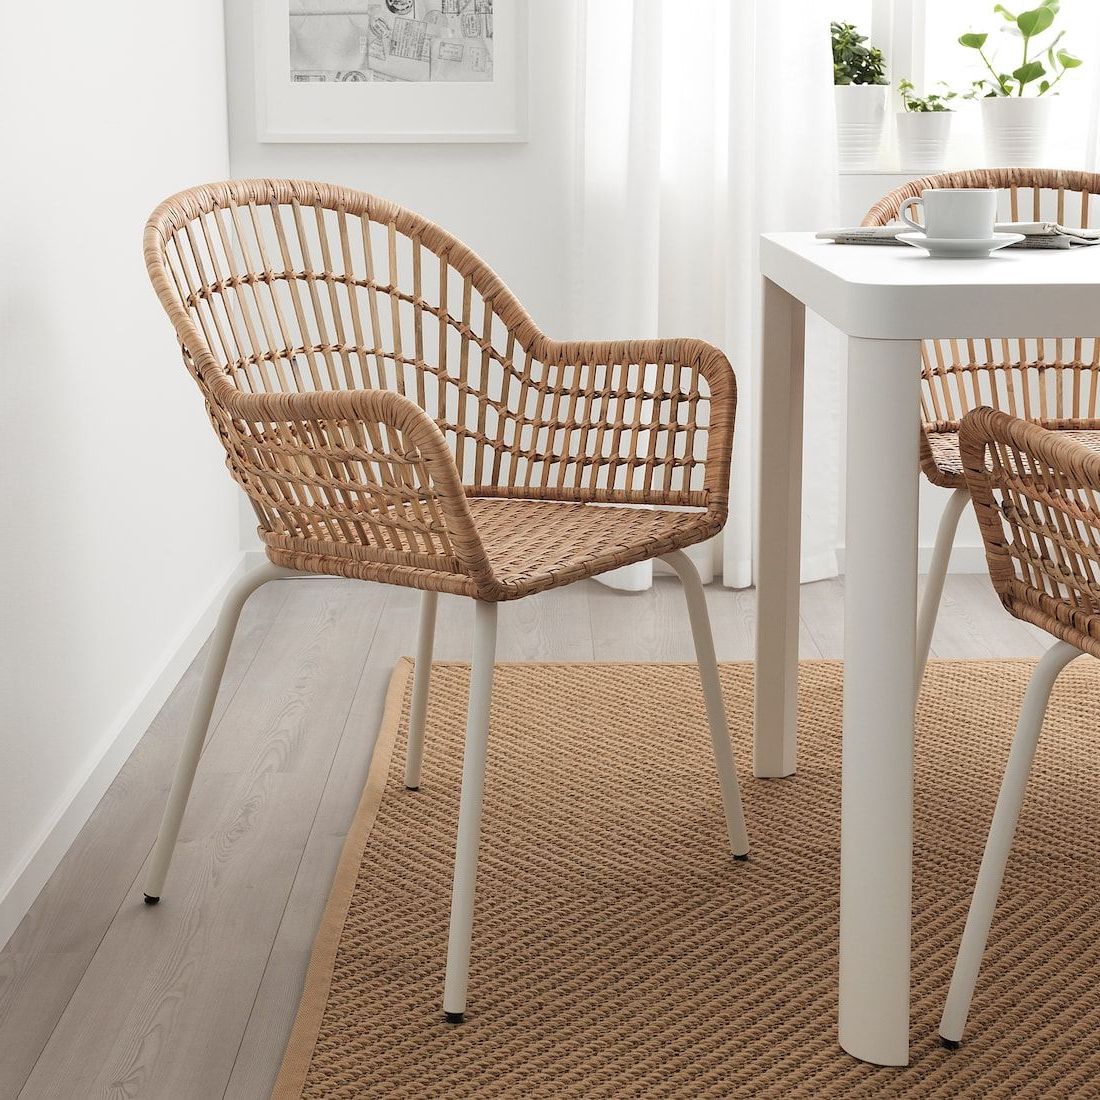 White Shell Large Patio Dining Sets Throughout Most Popular Nilsove Armchair – Rattan, White In  (View 1 of 15)